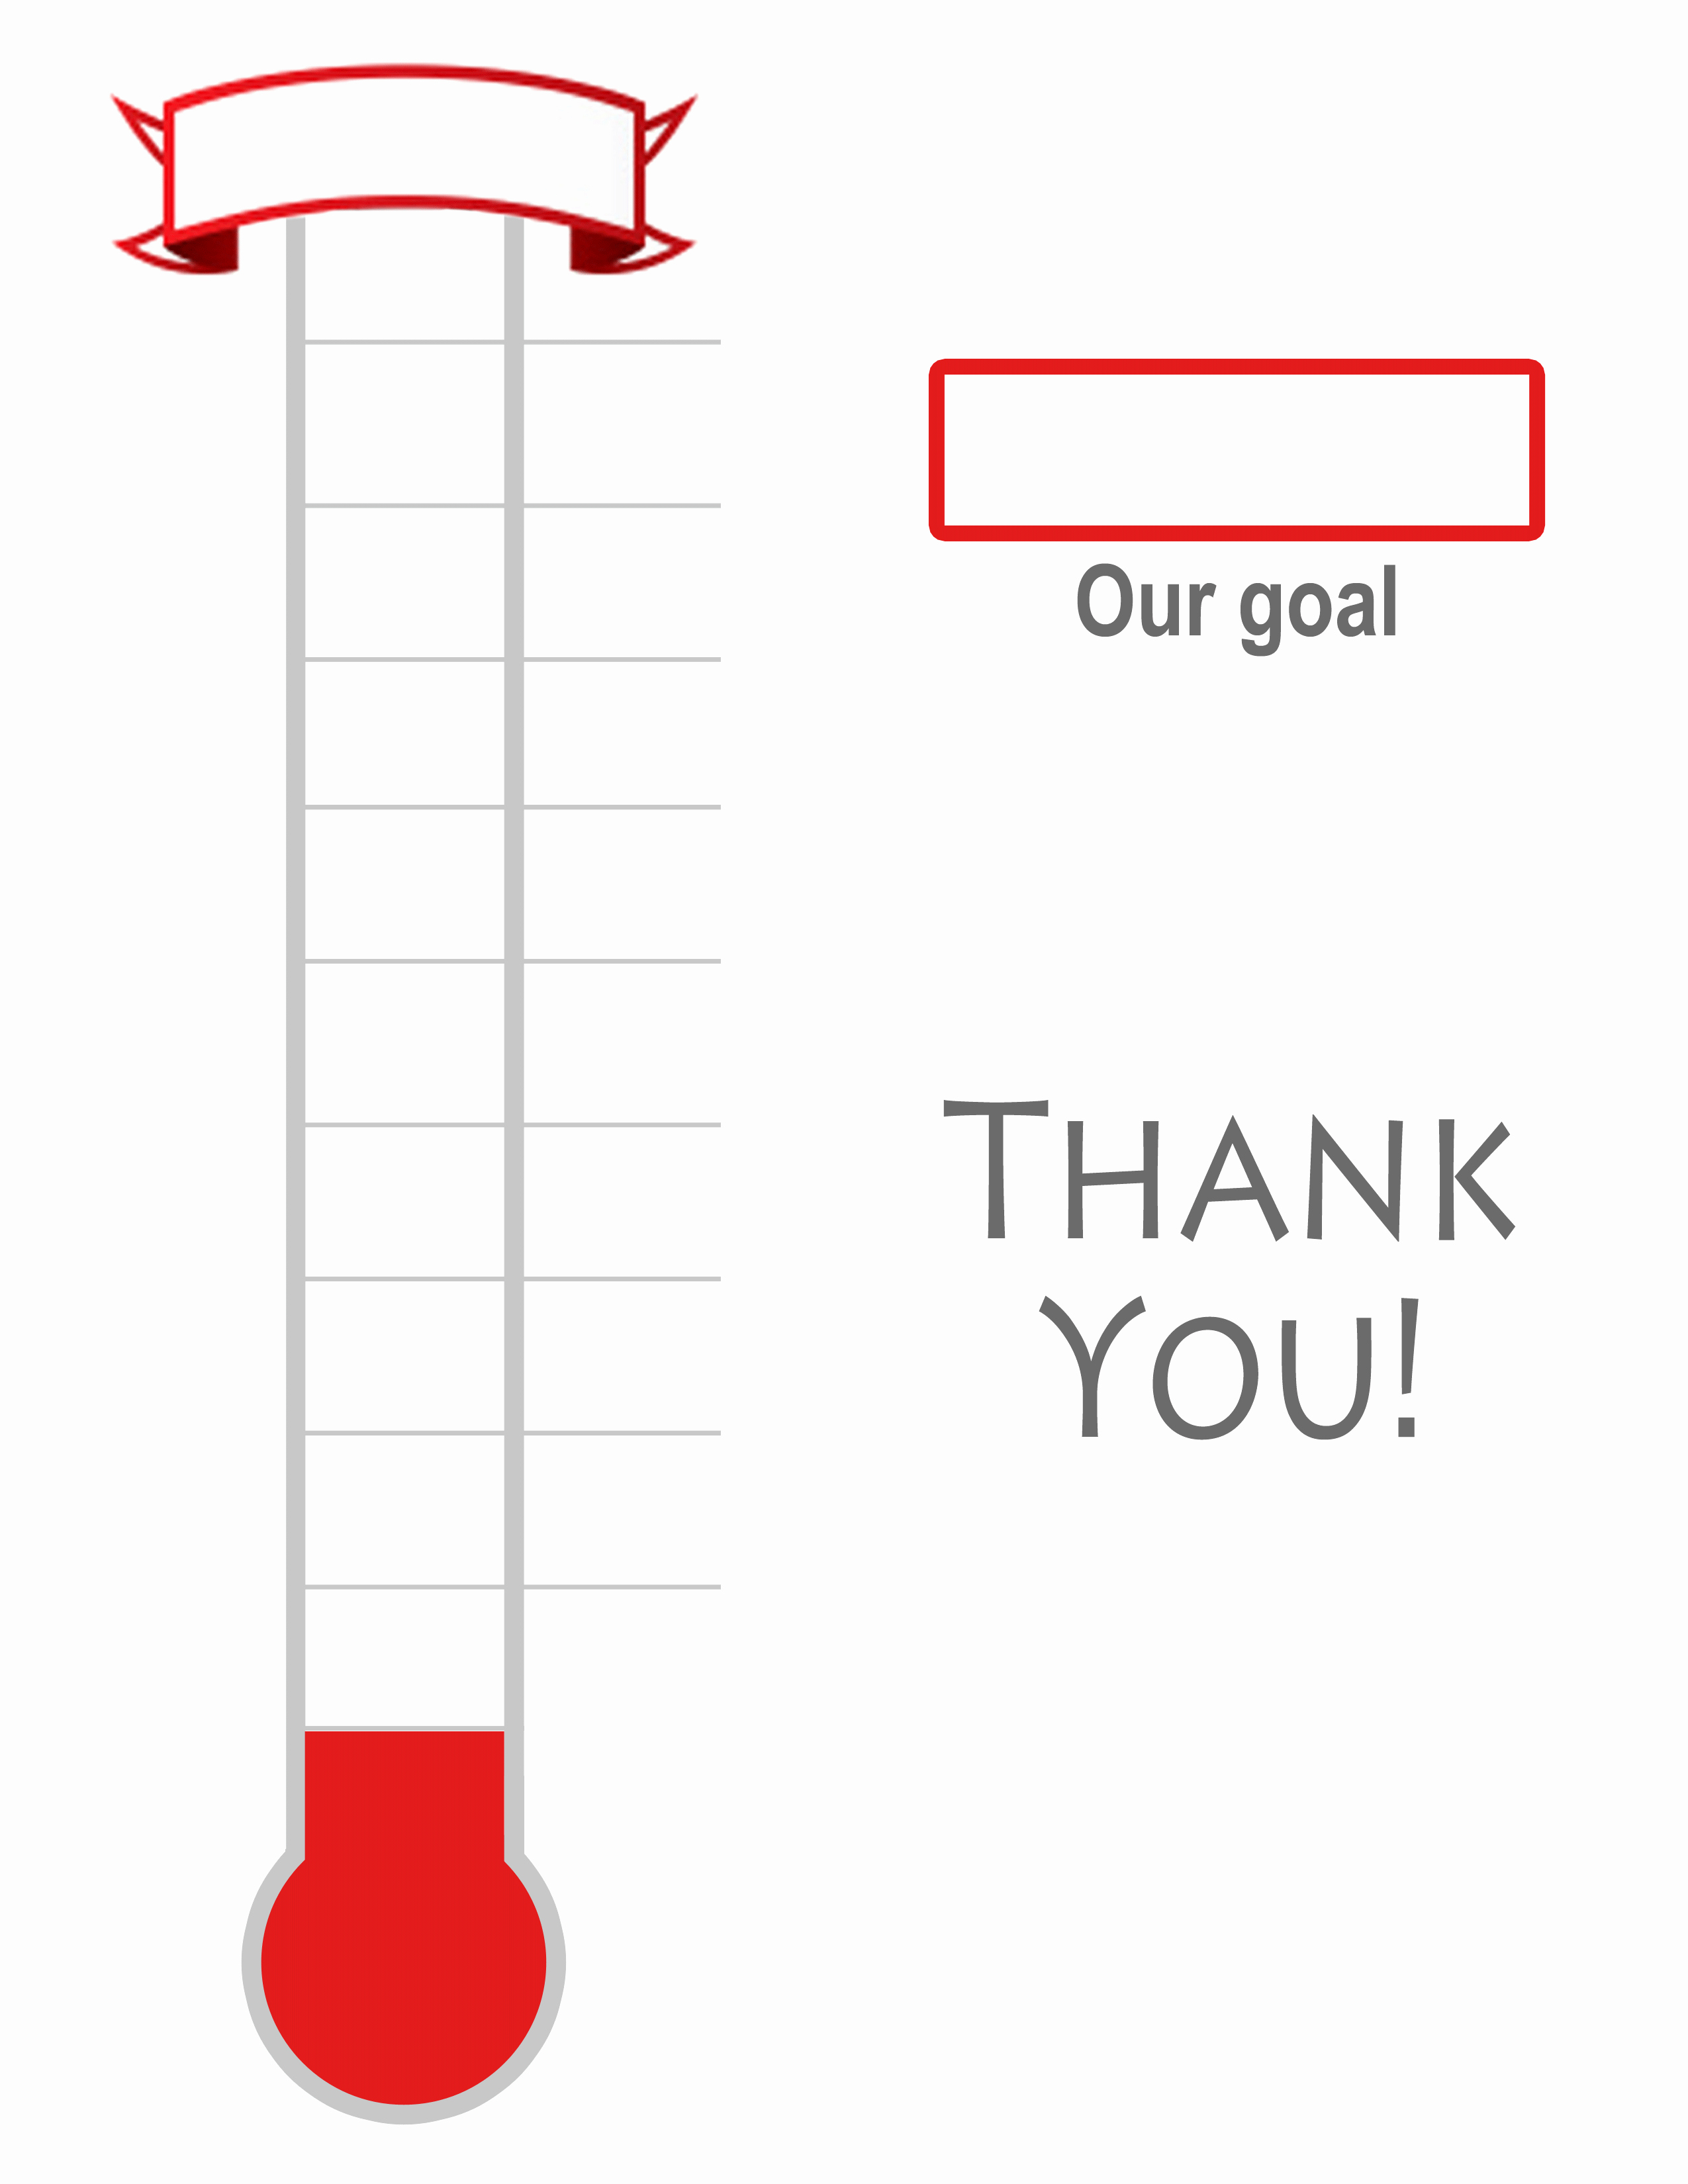 Fundraising thermometer Image Inspirational Fundraising Funds Raised Template